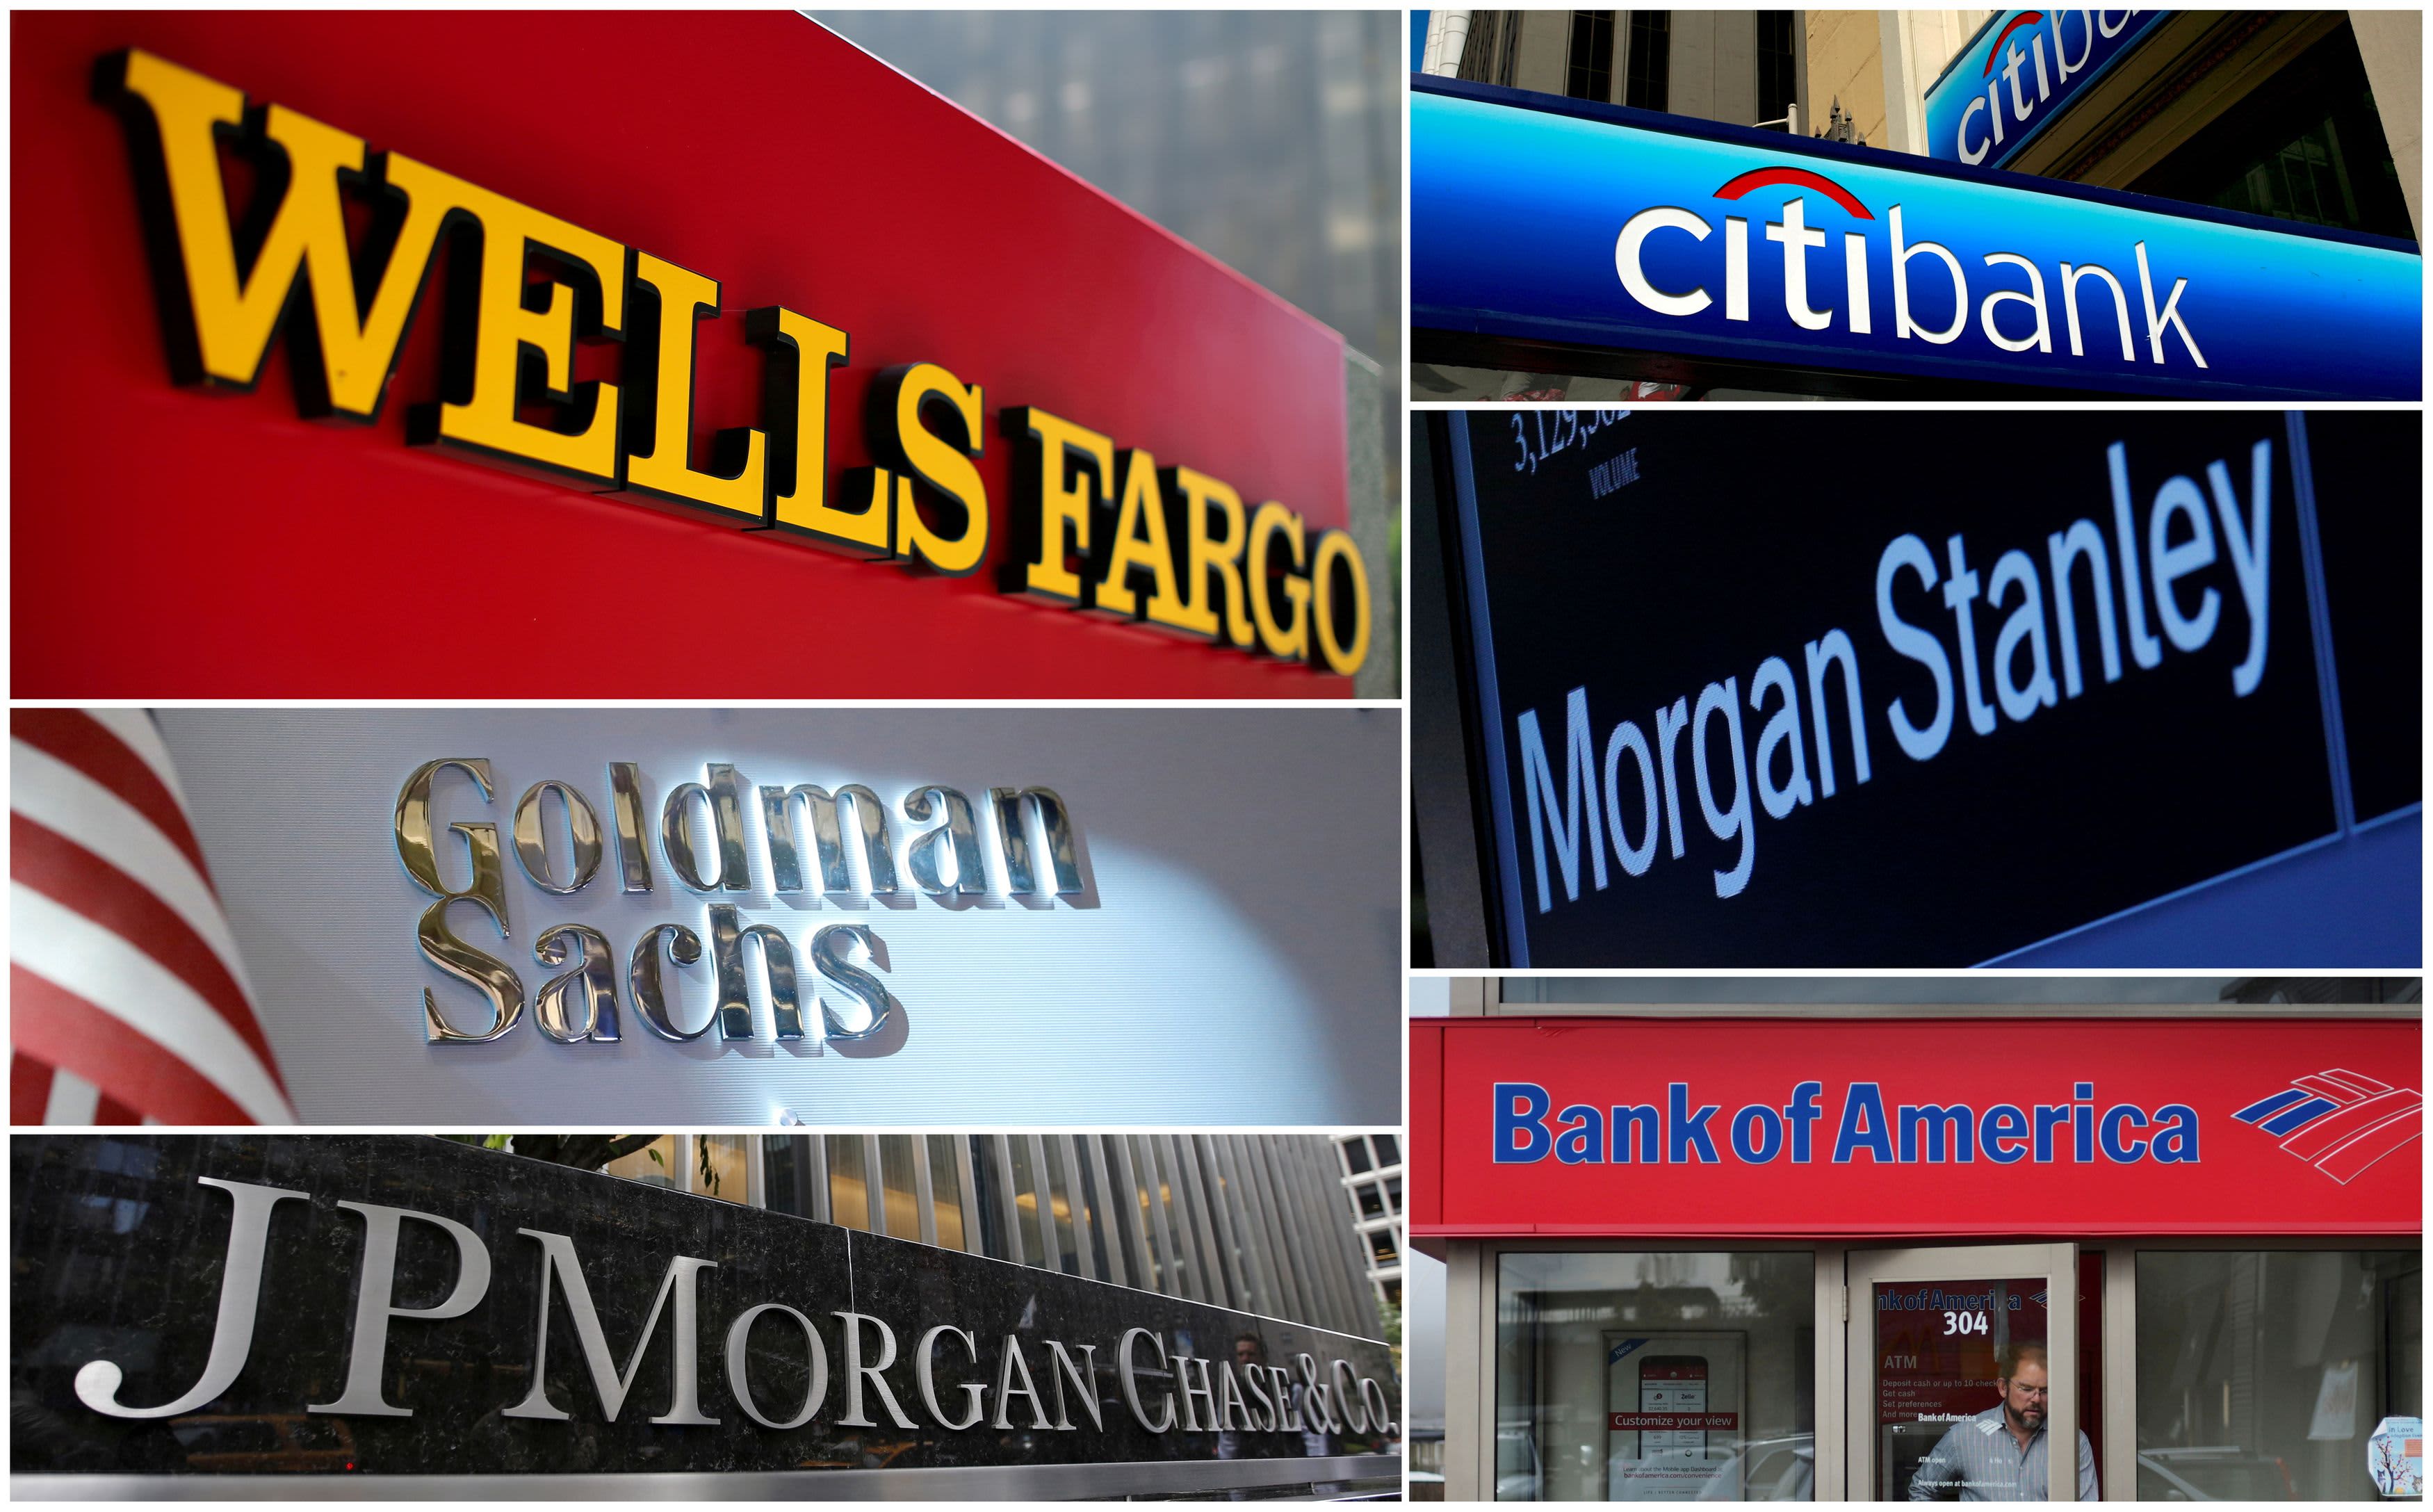 JPMorgan vs. Bank of America? Analysts say one of the stocks is set to soar 45%